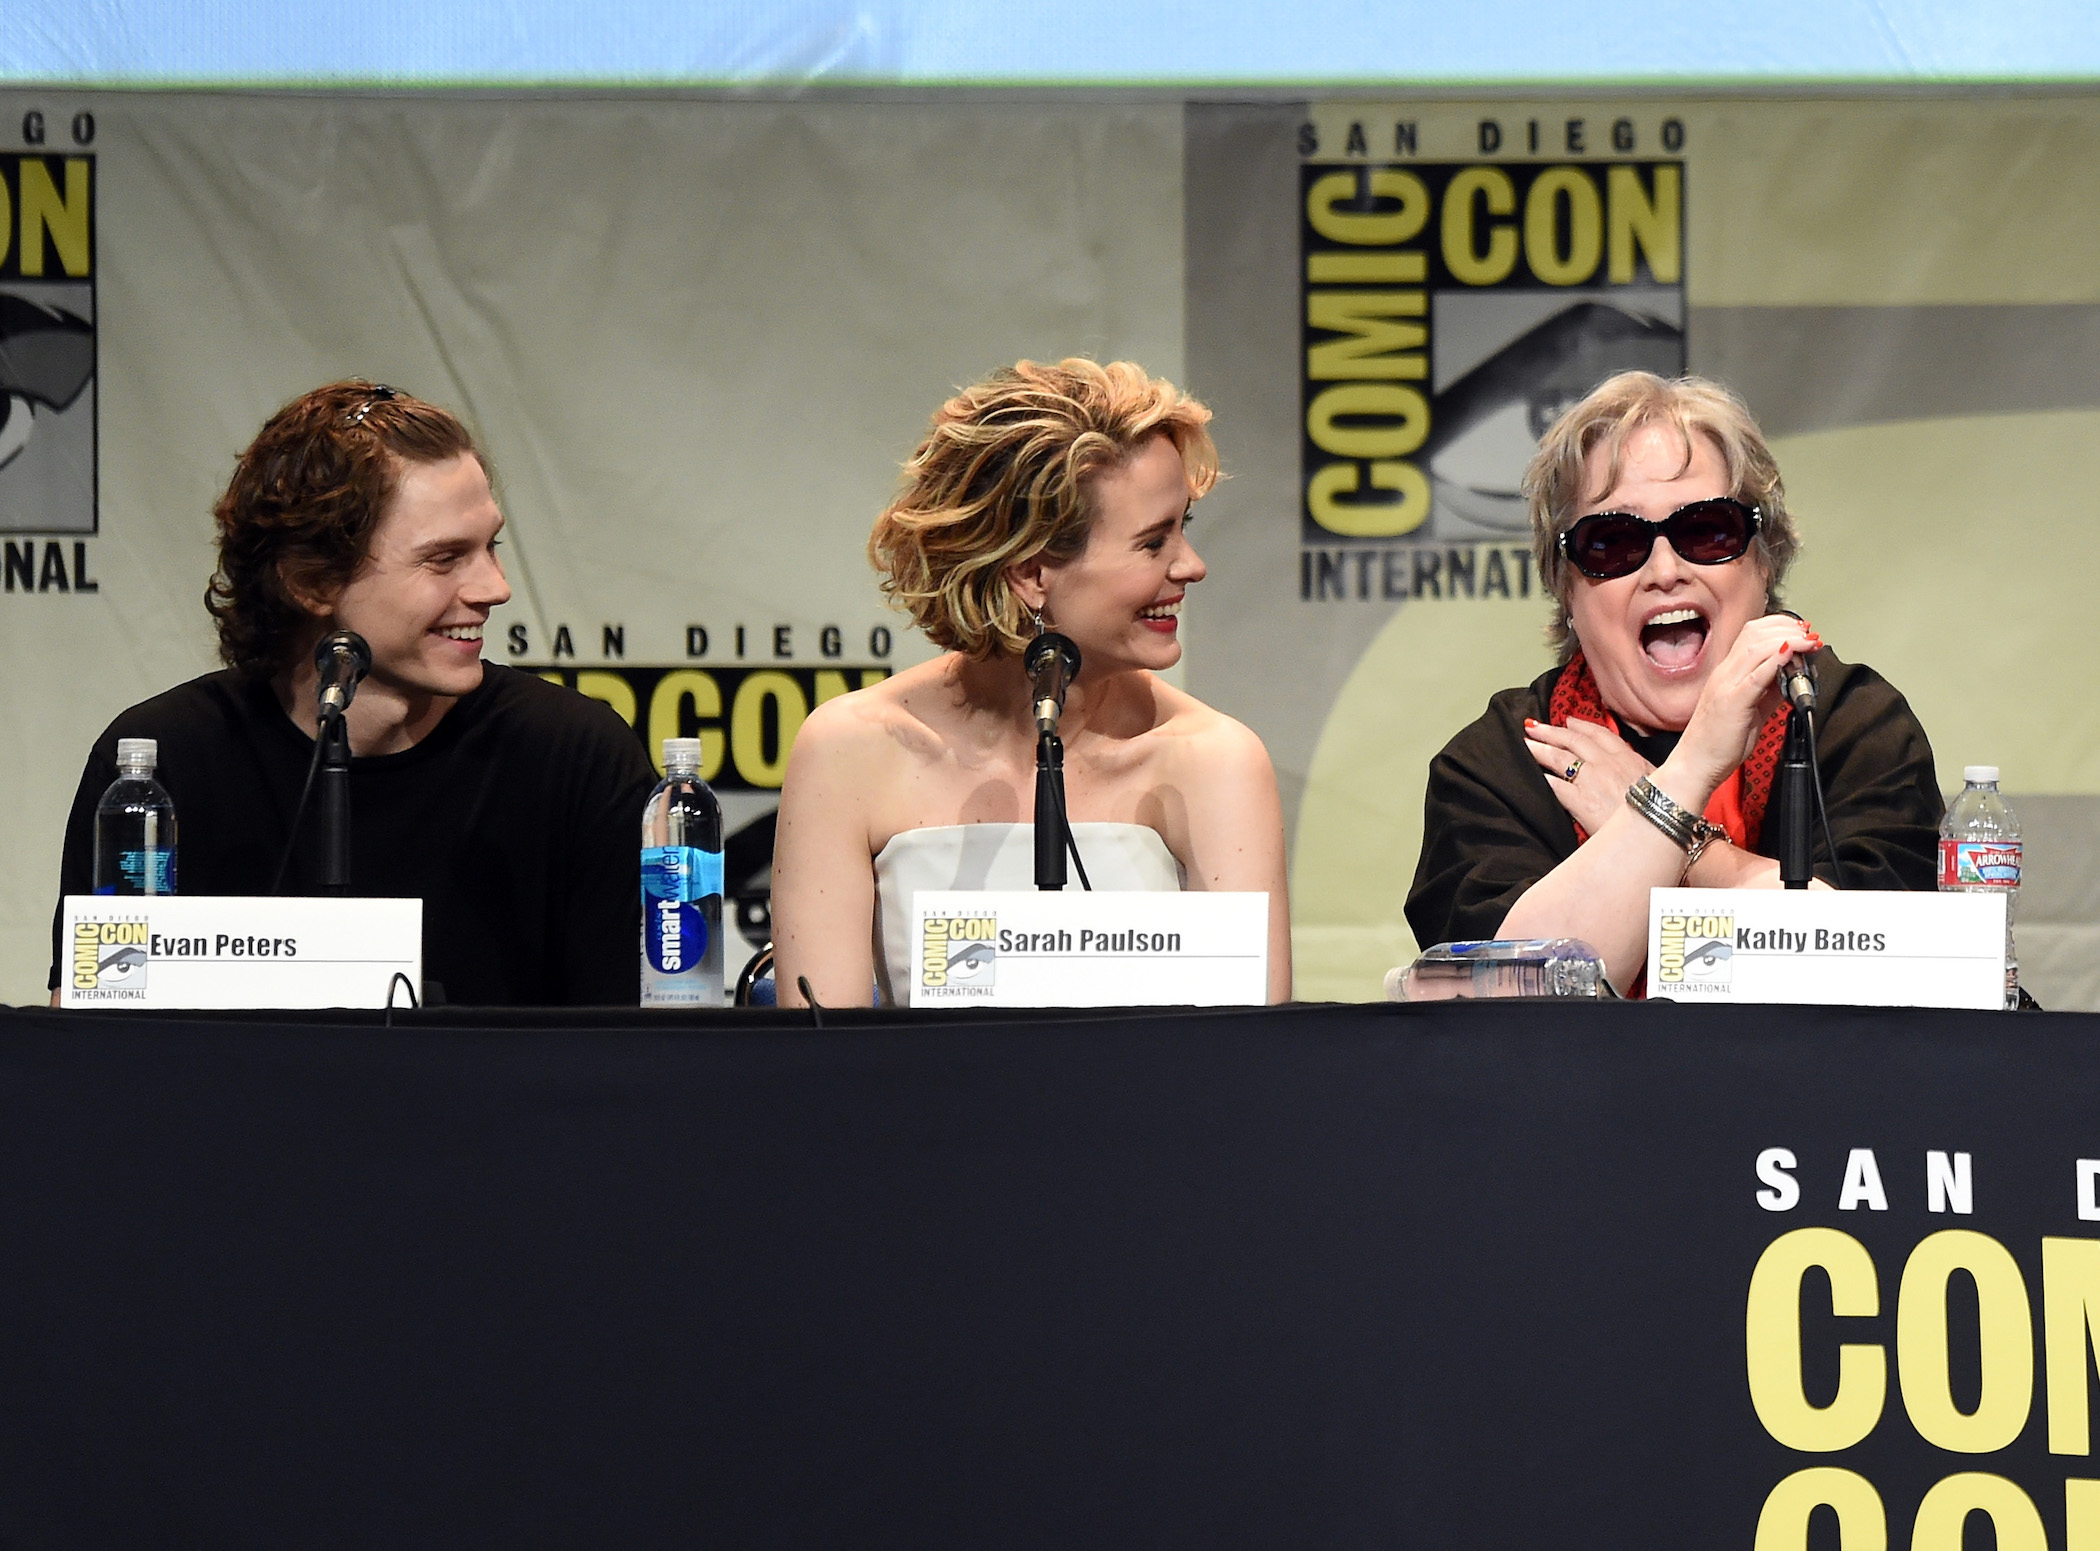 Evan Peters, Sarah Paulson, and Kathy Bates from 'American Horror Story' Season 10 sitting next to each other at a Comic Con panel in 2015